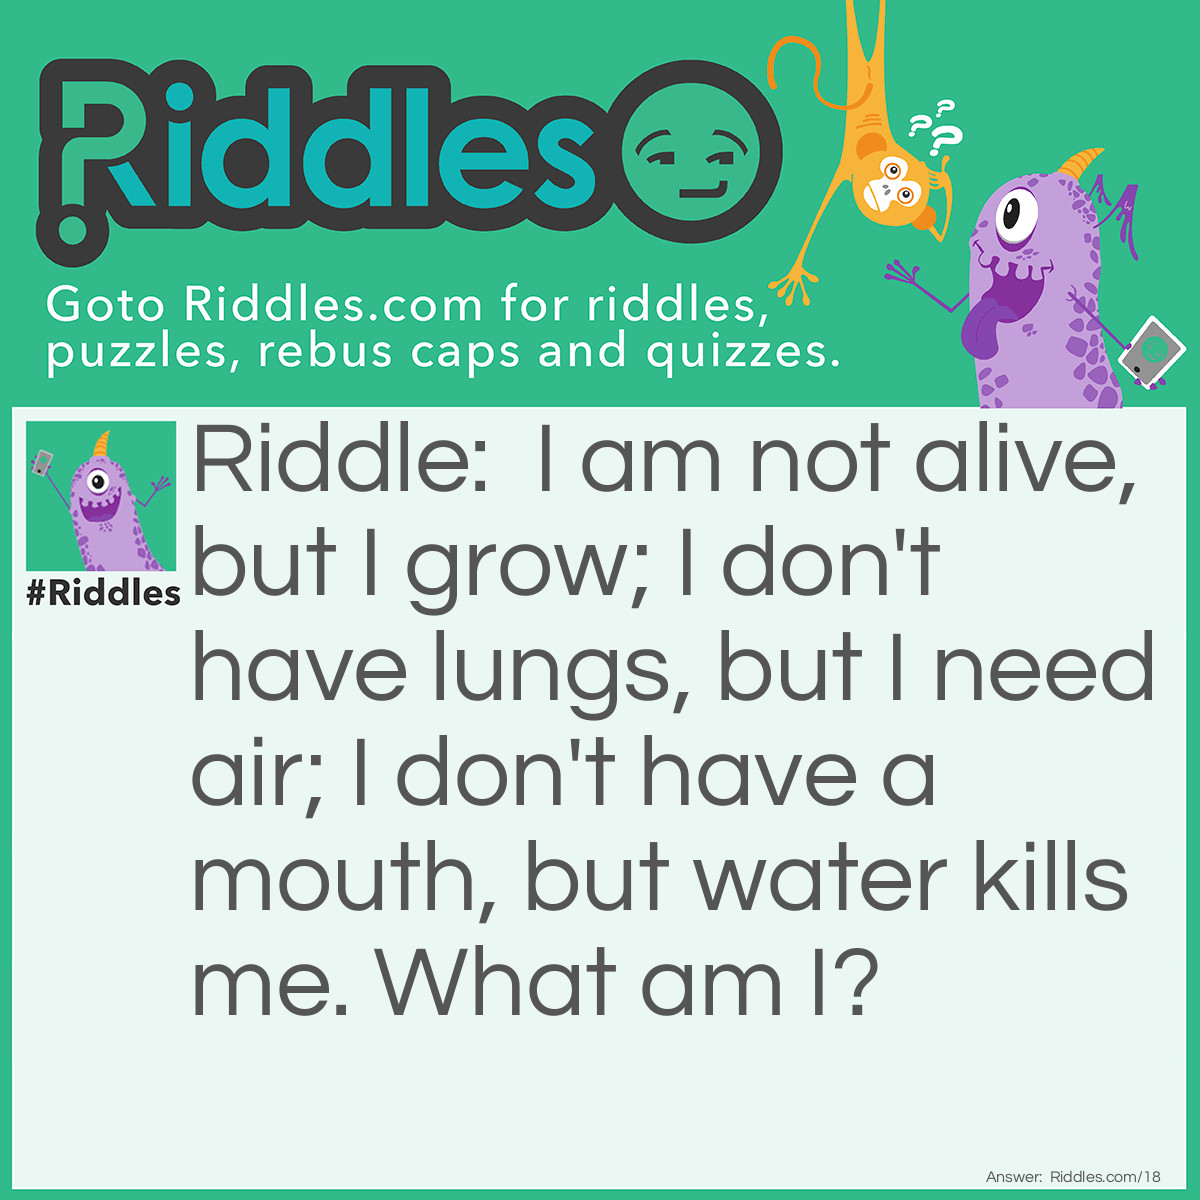 Riddle: I am not alive, but I grow; I don't have lungs, but I need air; I don't have a mouth, but water kills me. <a href="/what-am-i-riddles">What am I</a>? Answer: Fire.